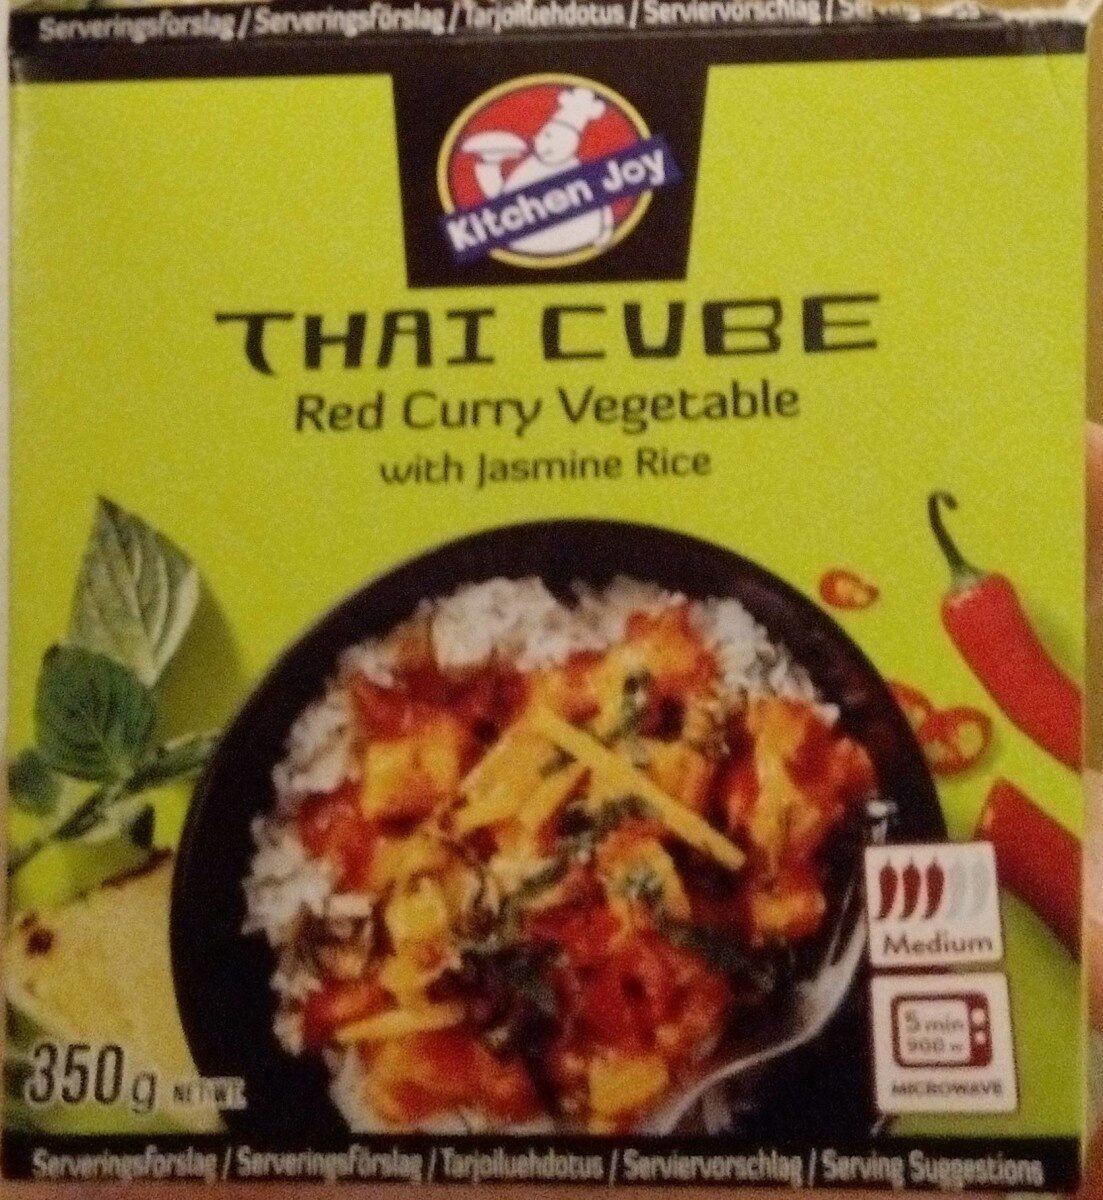 Thai Cube - Red Curry Vegetable - Product